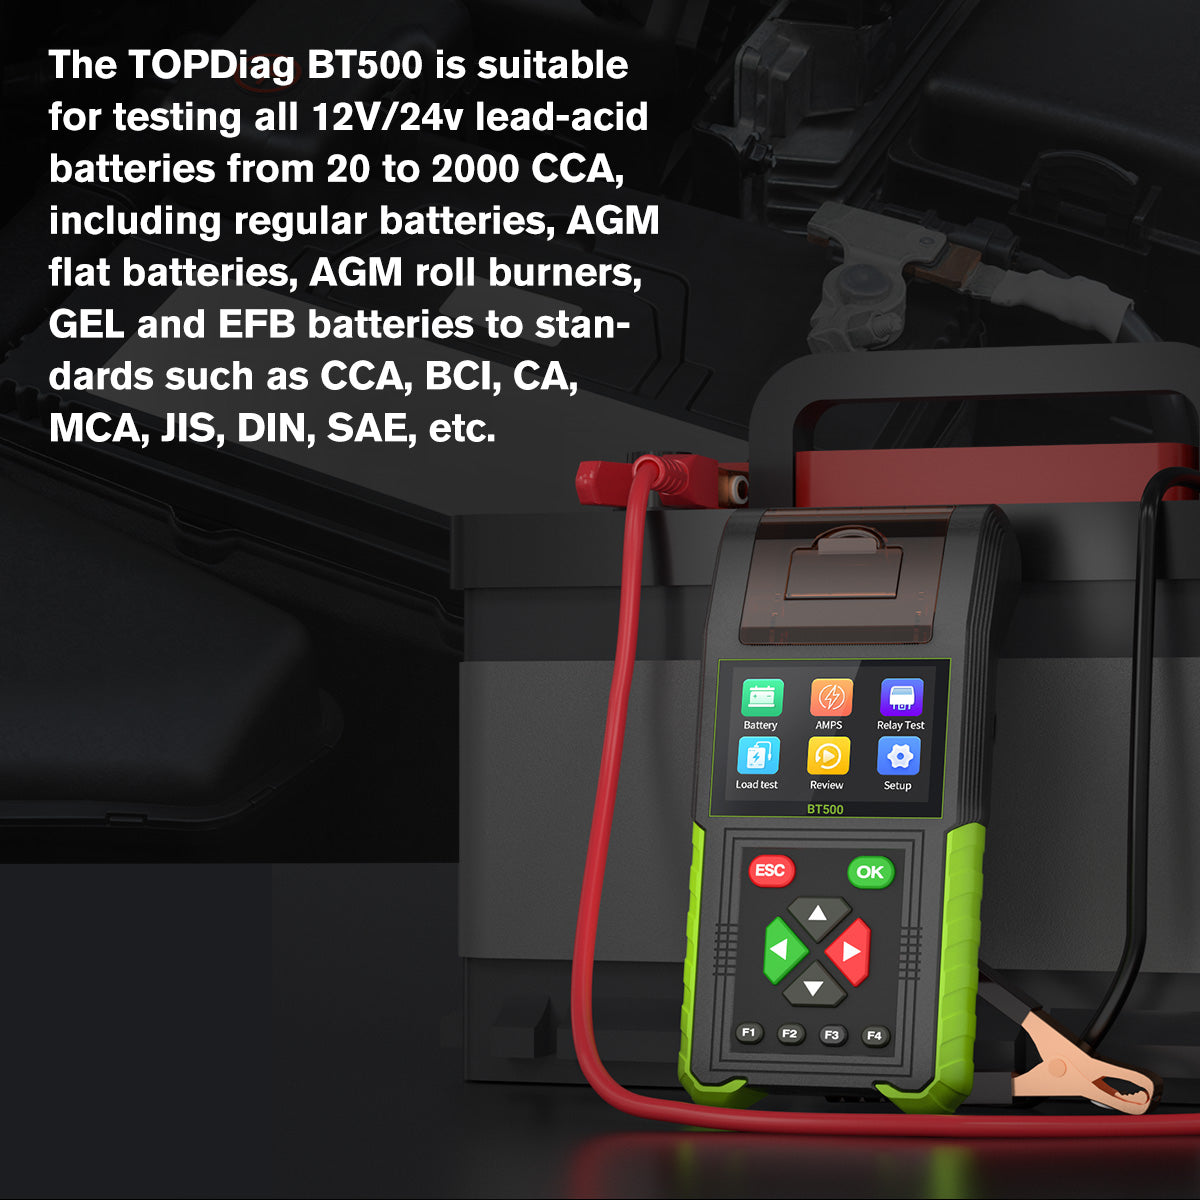 2023 New BT500 Car Battery Tester 12V 24V With Printer 20-2000CCA Battery System Detect Auto Battery Analyzer Car Battery Tools